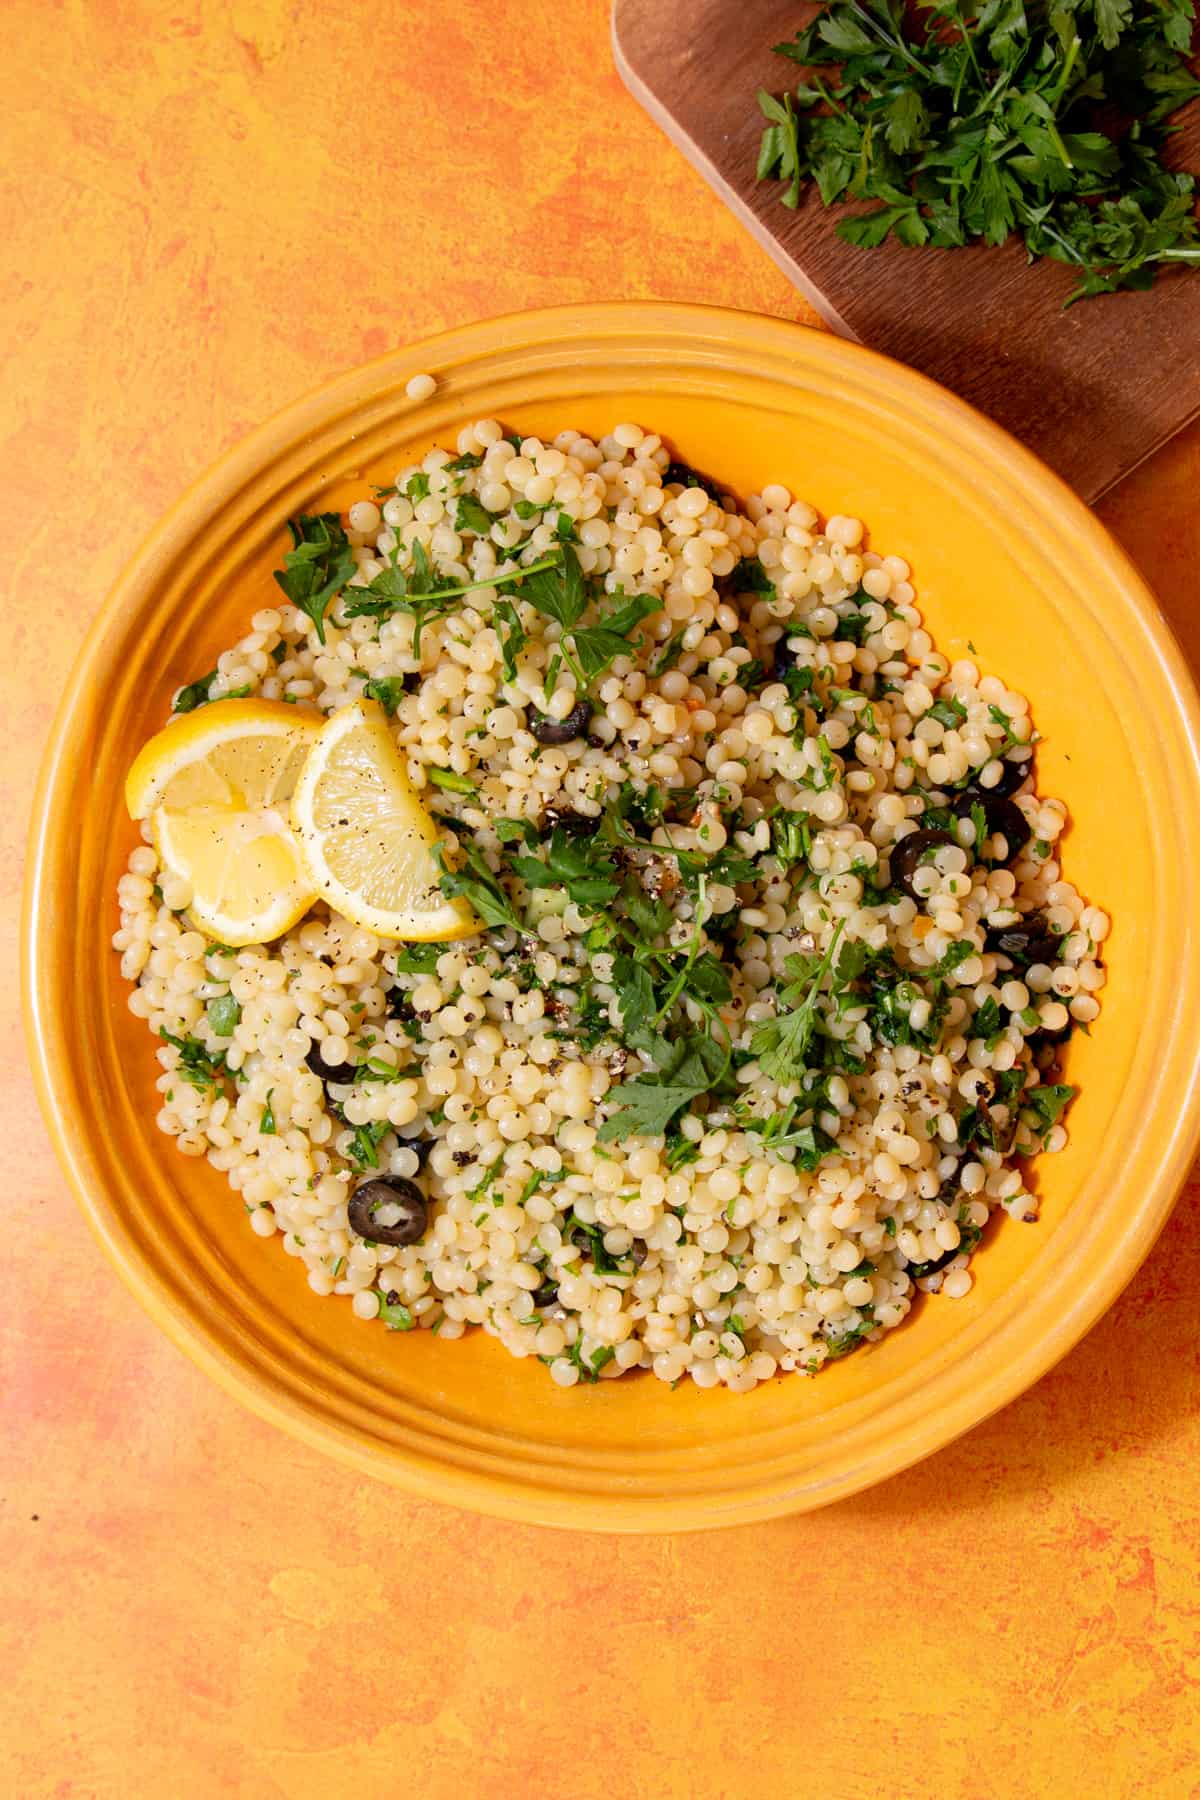 Overhead shot of a yellow dish with giant cous cous topped with herbs and lemon wedges and slices of black olives on an orange background with some fresh parsley on a chopping board in partial view.